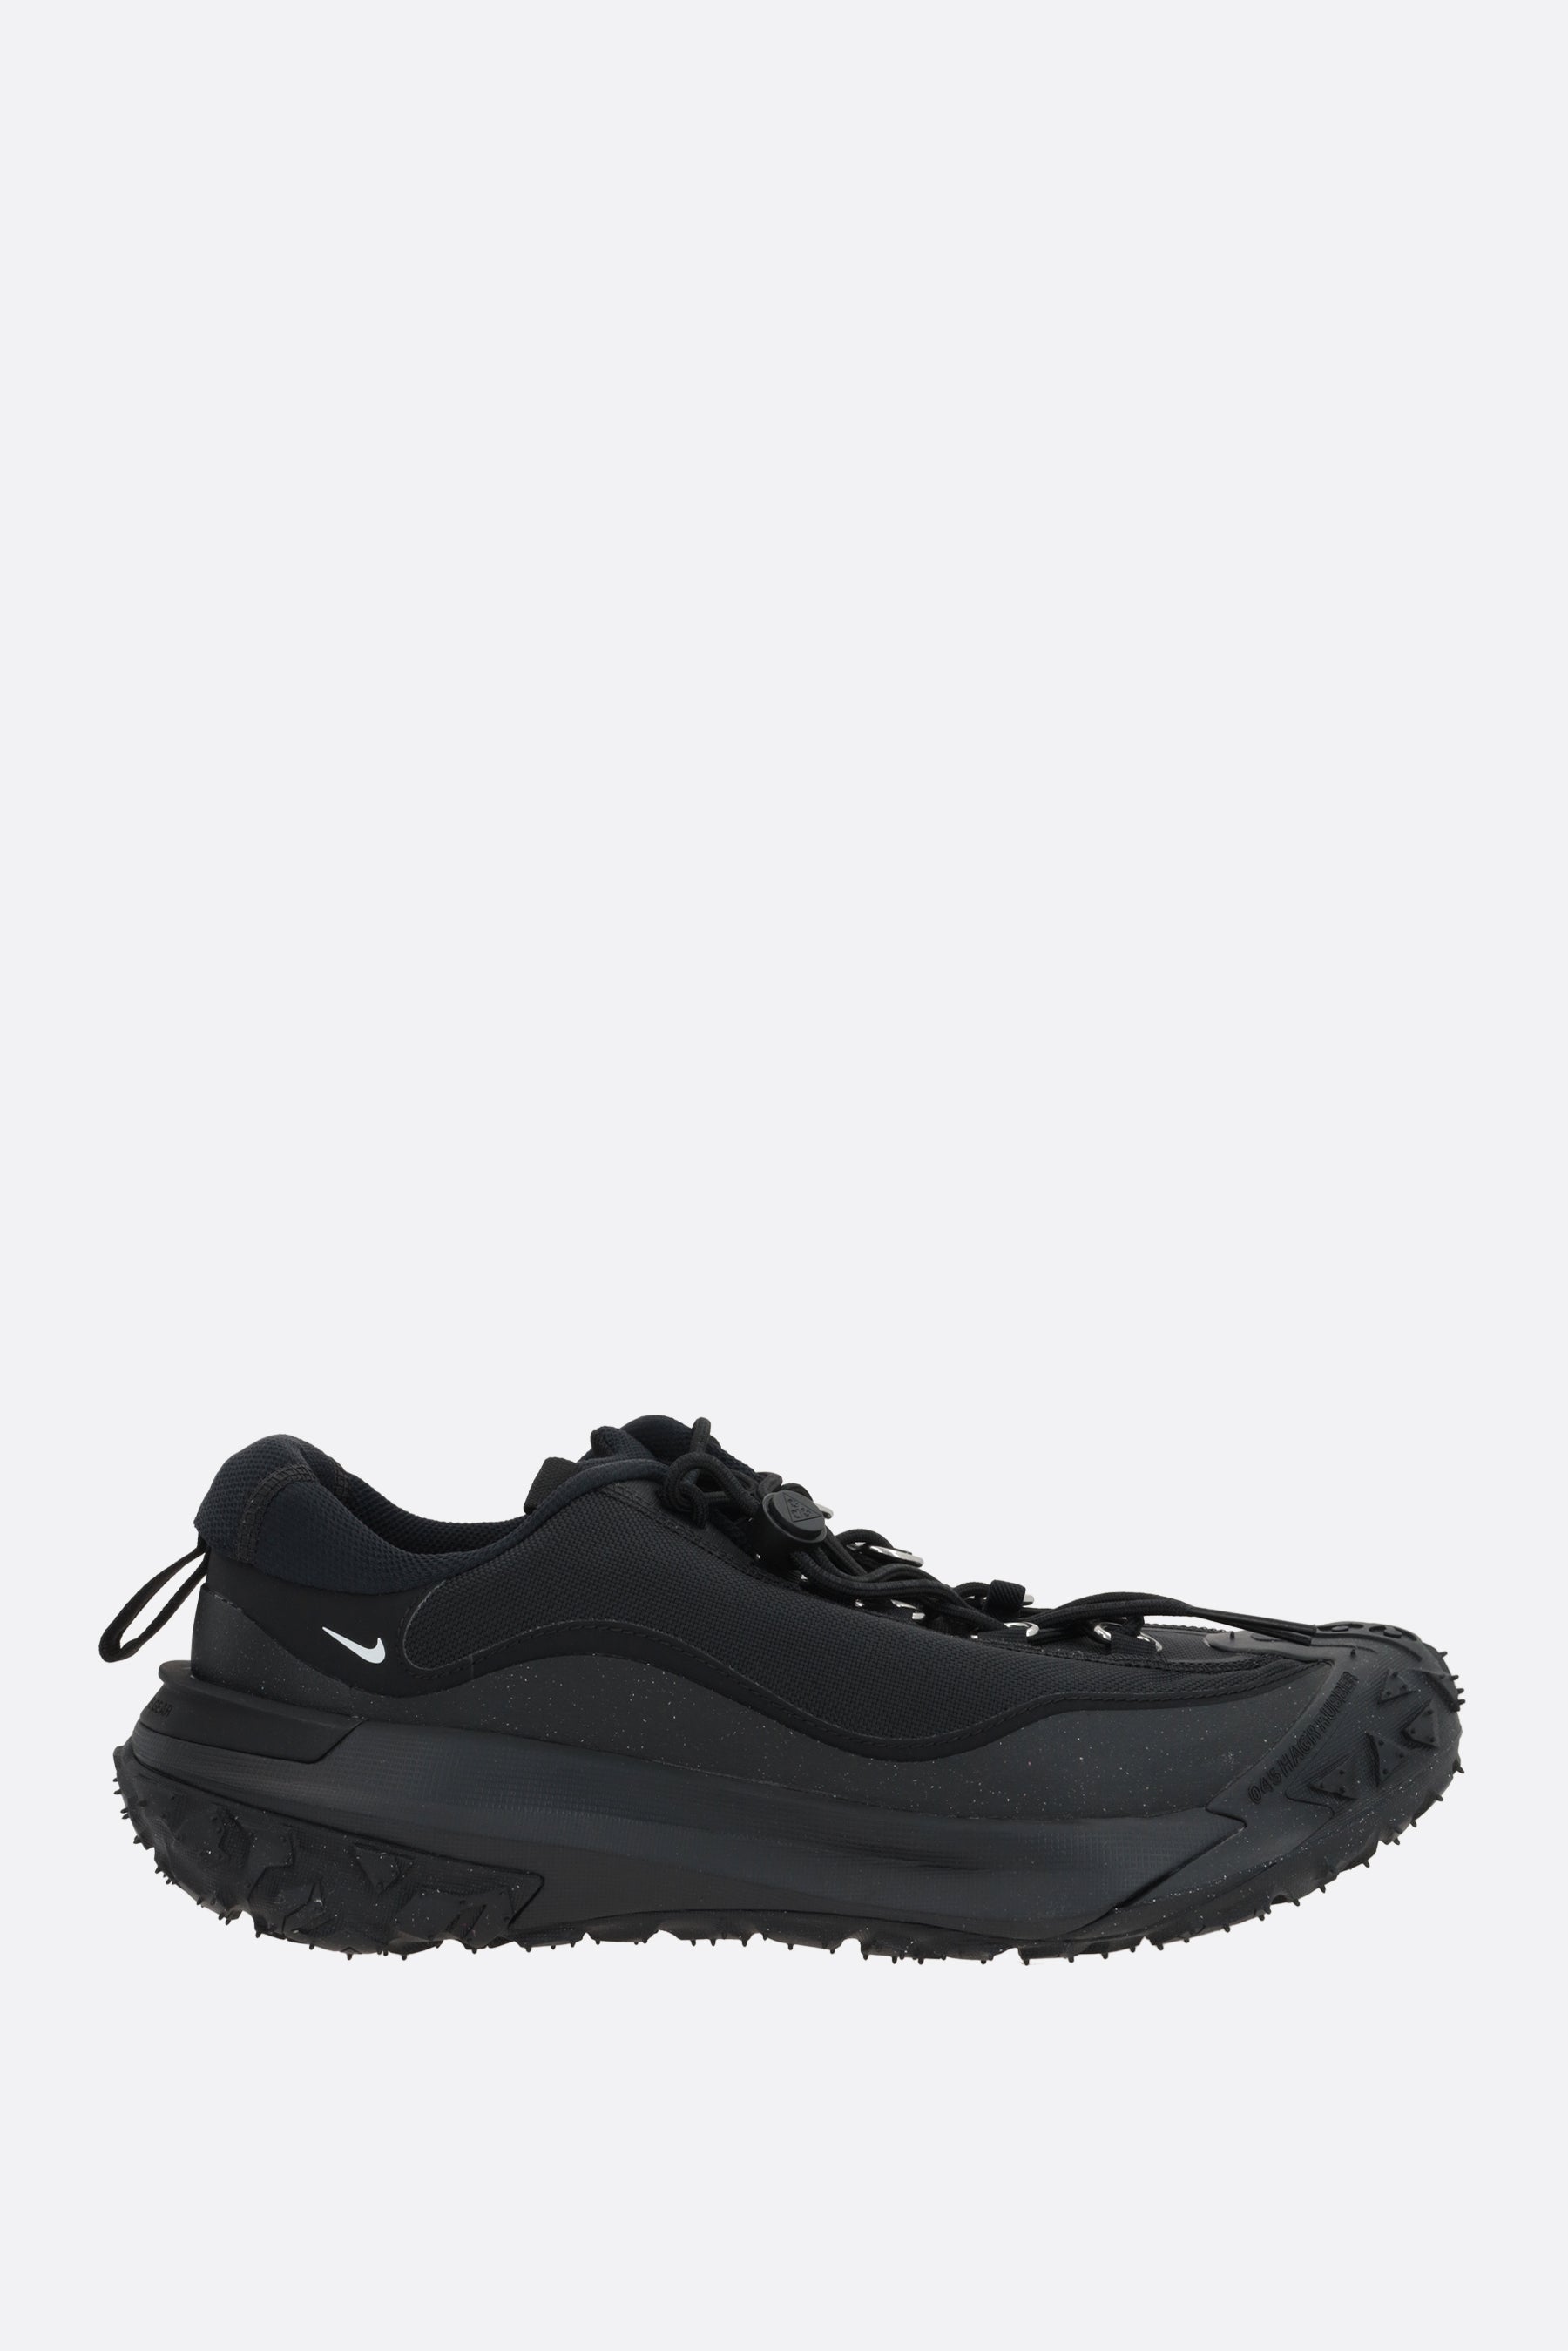 ACG Mountain Fly 2 nylon and rubber sneakers